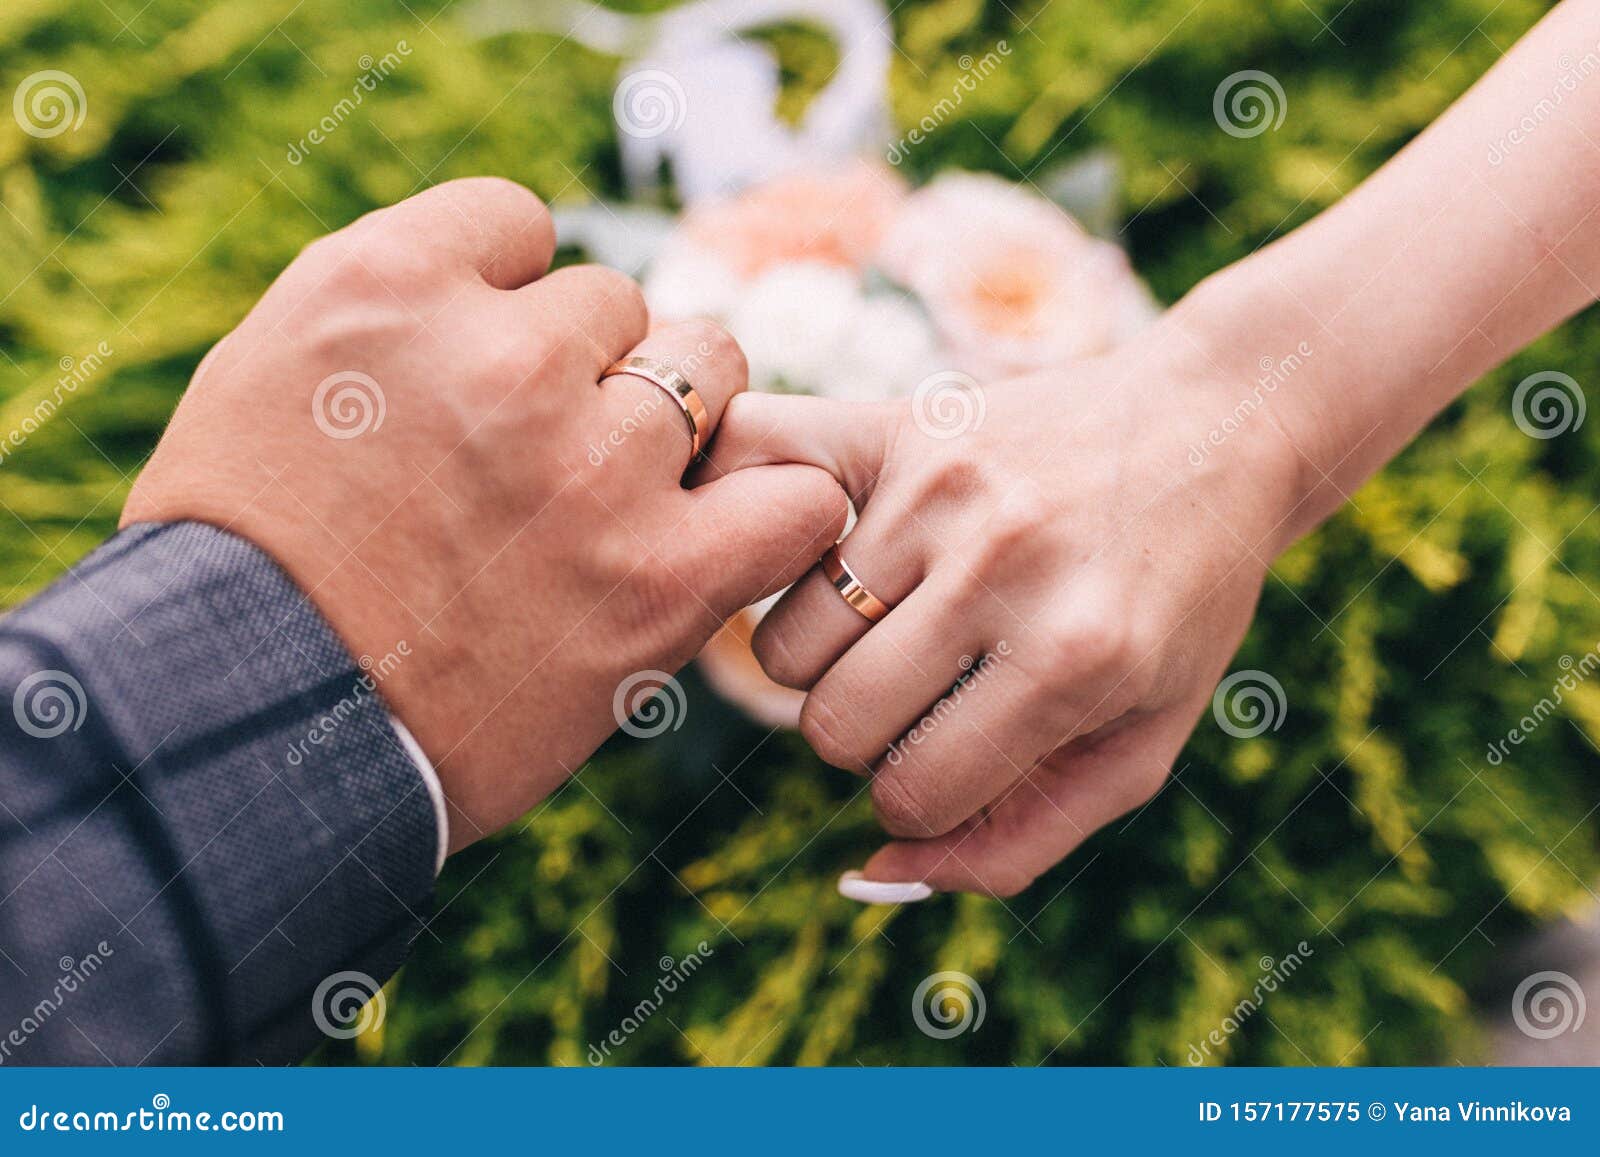 Newly Wed Couple's Hands with Wedding Rings, People Stock Footage ft. bride  & bridal - Envato Elements